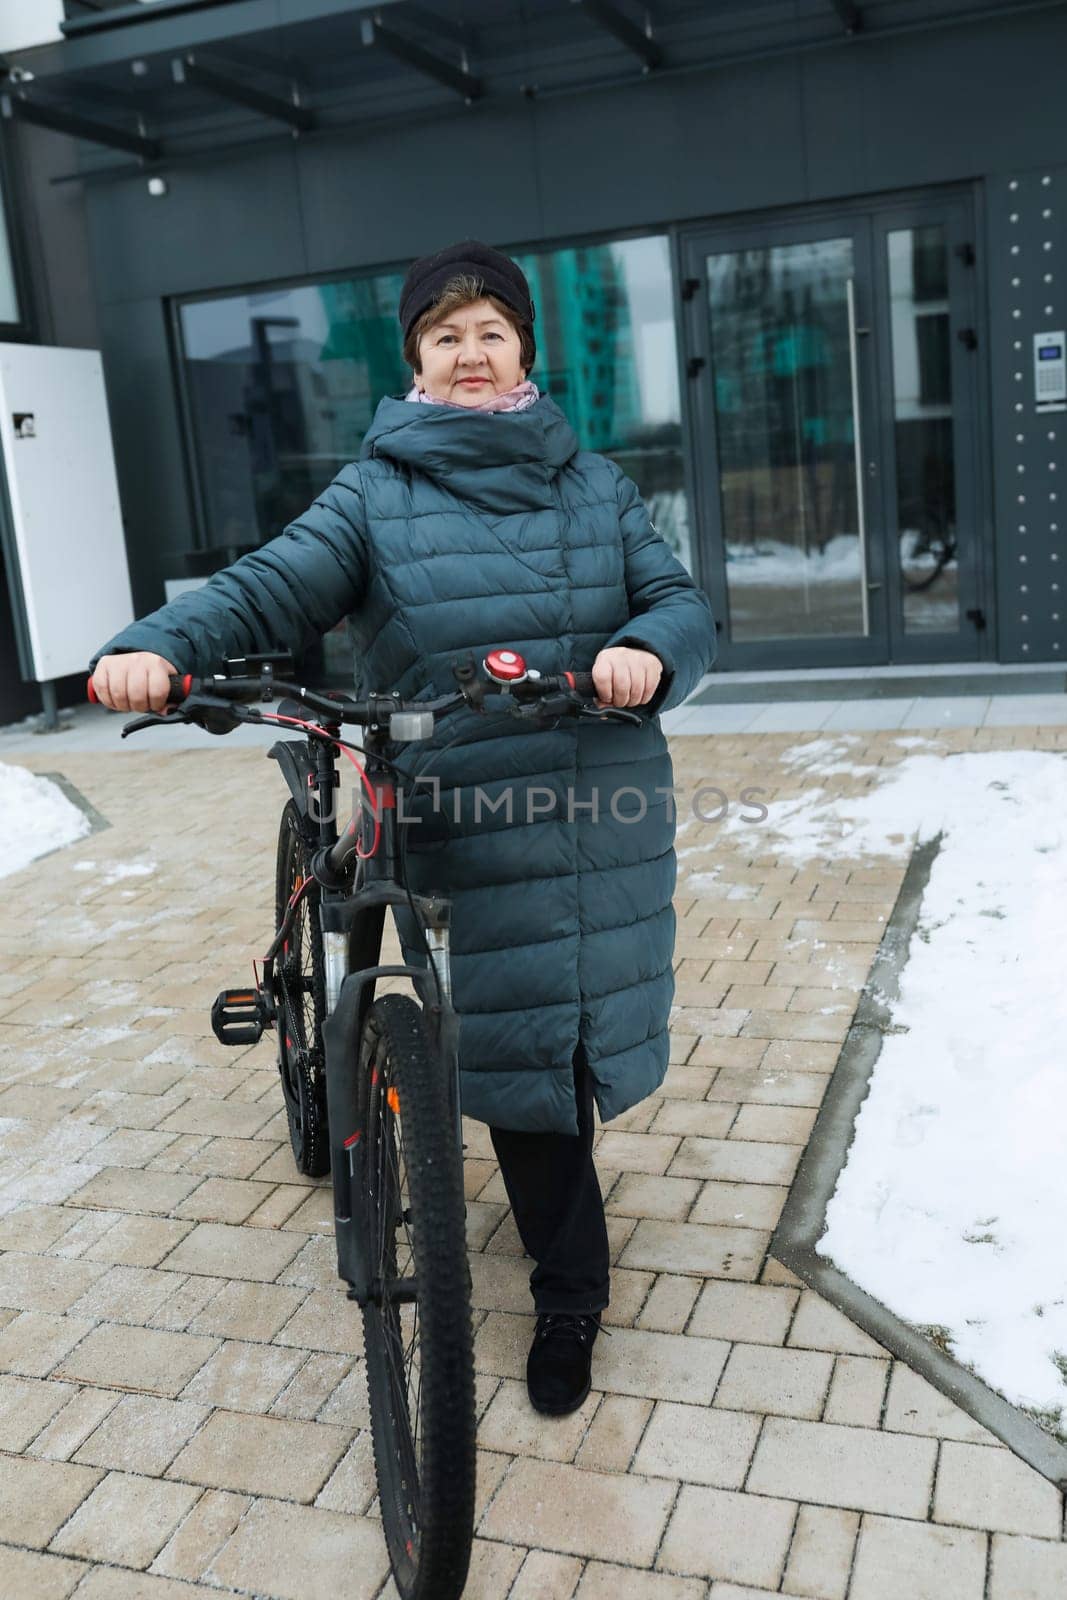 An elderly woman went for a bike ride in the cold.